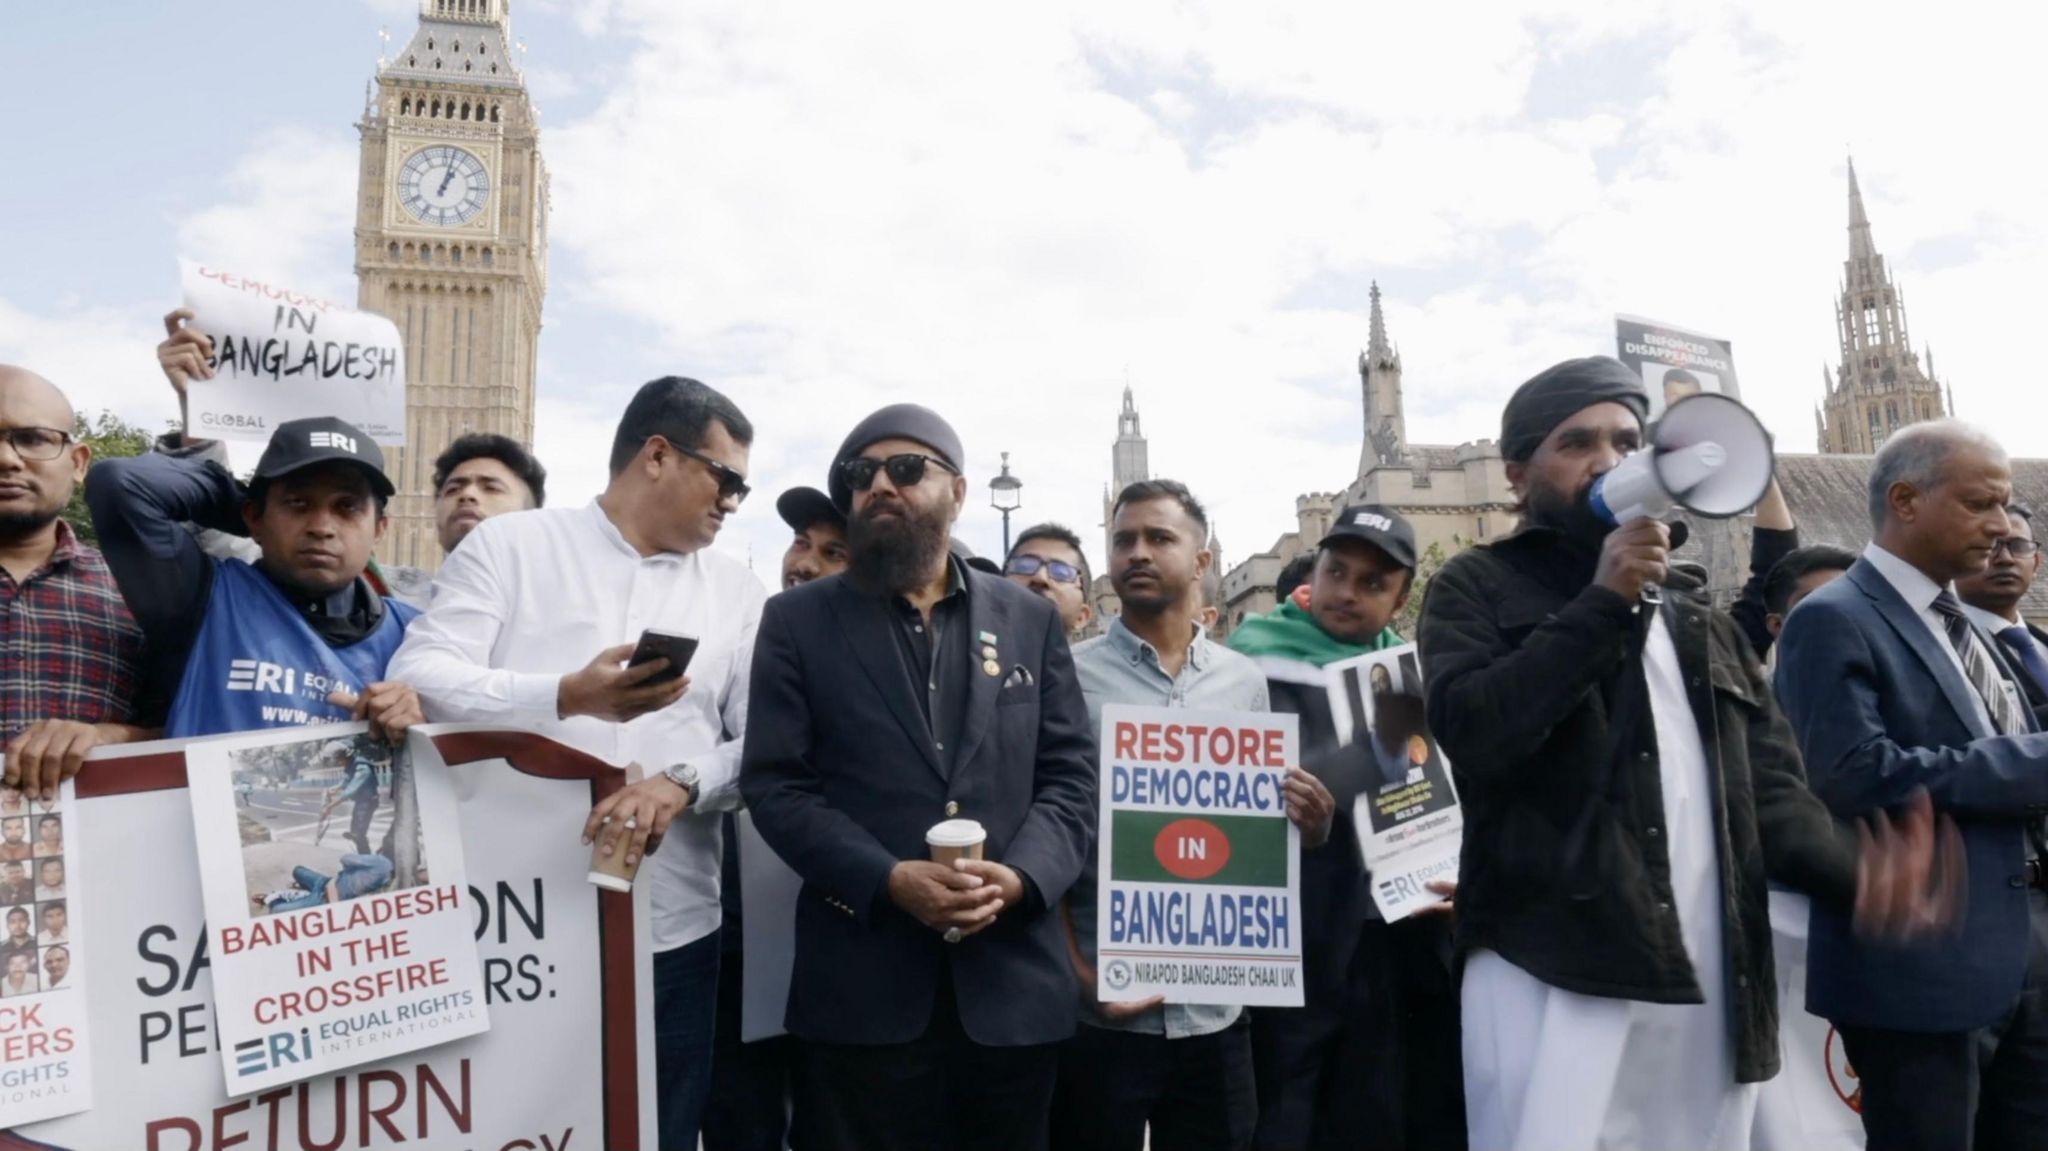 Regular protests take place in London against Sheikh Hasina's regime in Bangladesh